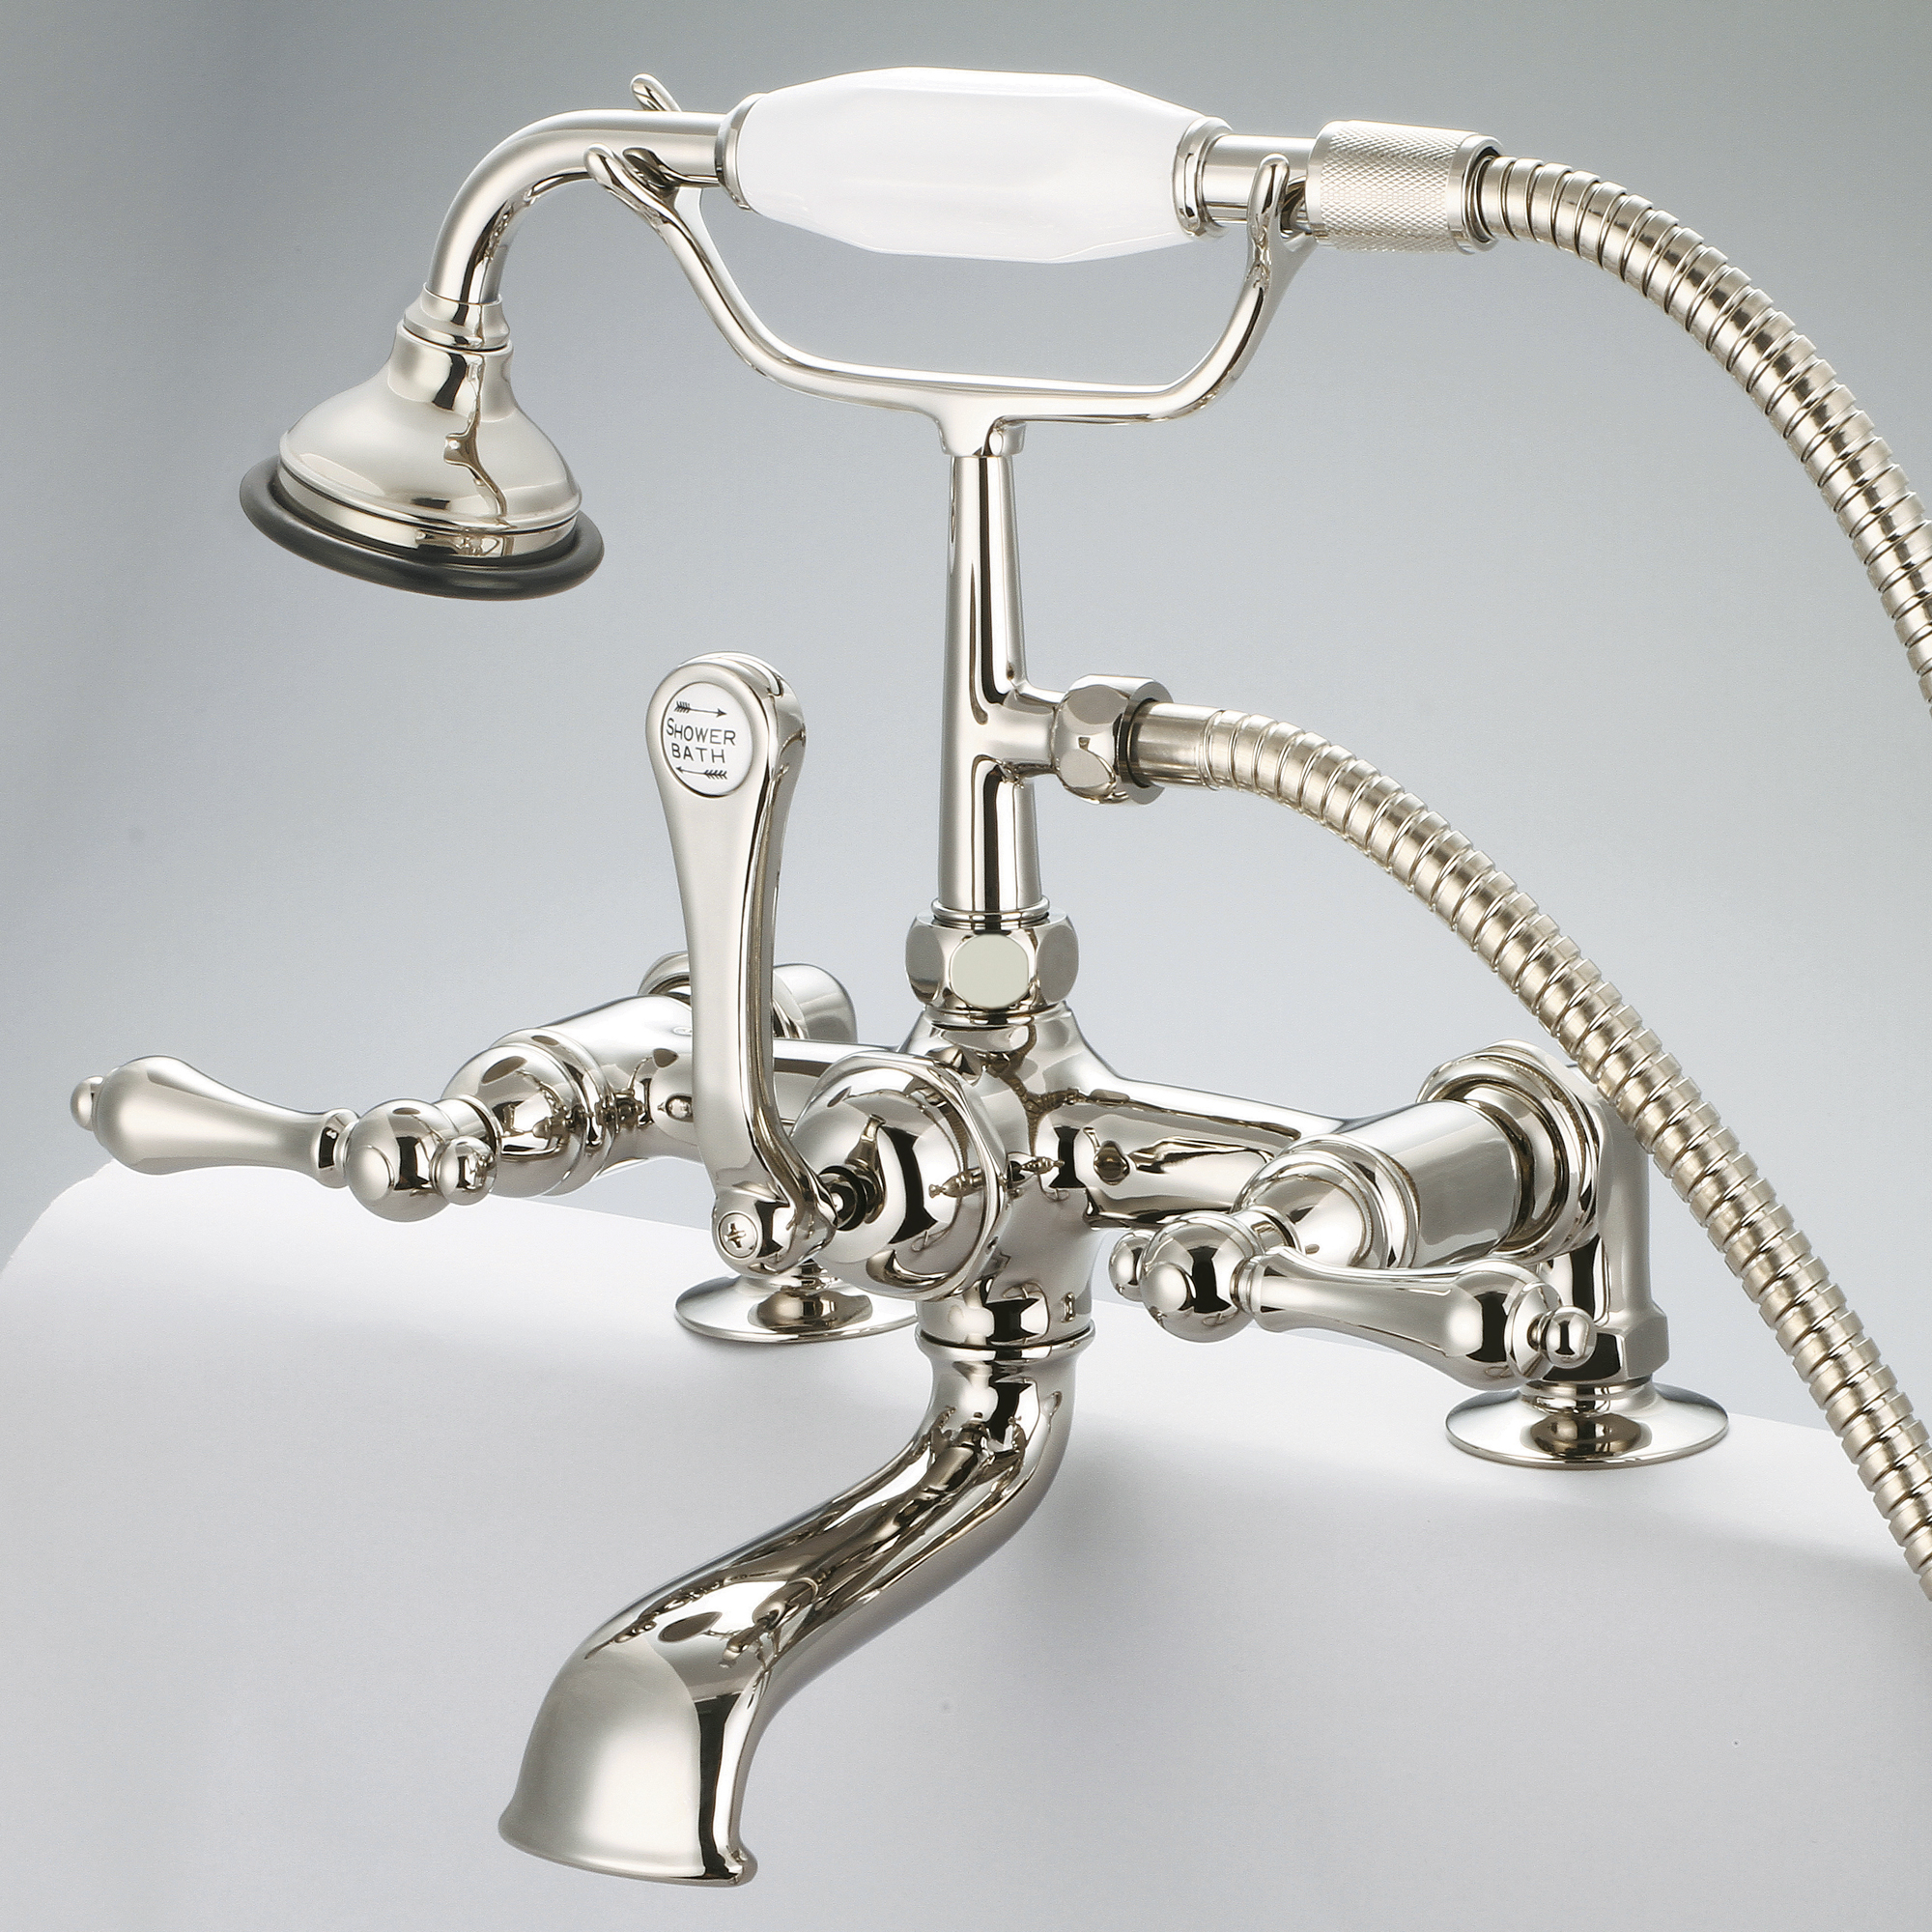 Vintage Classic 7 Inch Spread Deck Mount Tub Faucet With 2 Inch Risers & Handheld Shower in Polished Nickel (PVD) Finish With Metal Lever Handles Without Labels